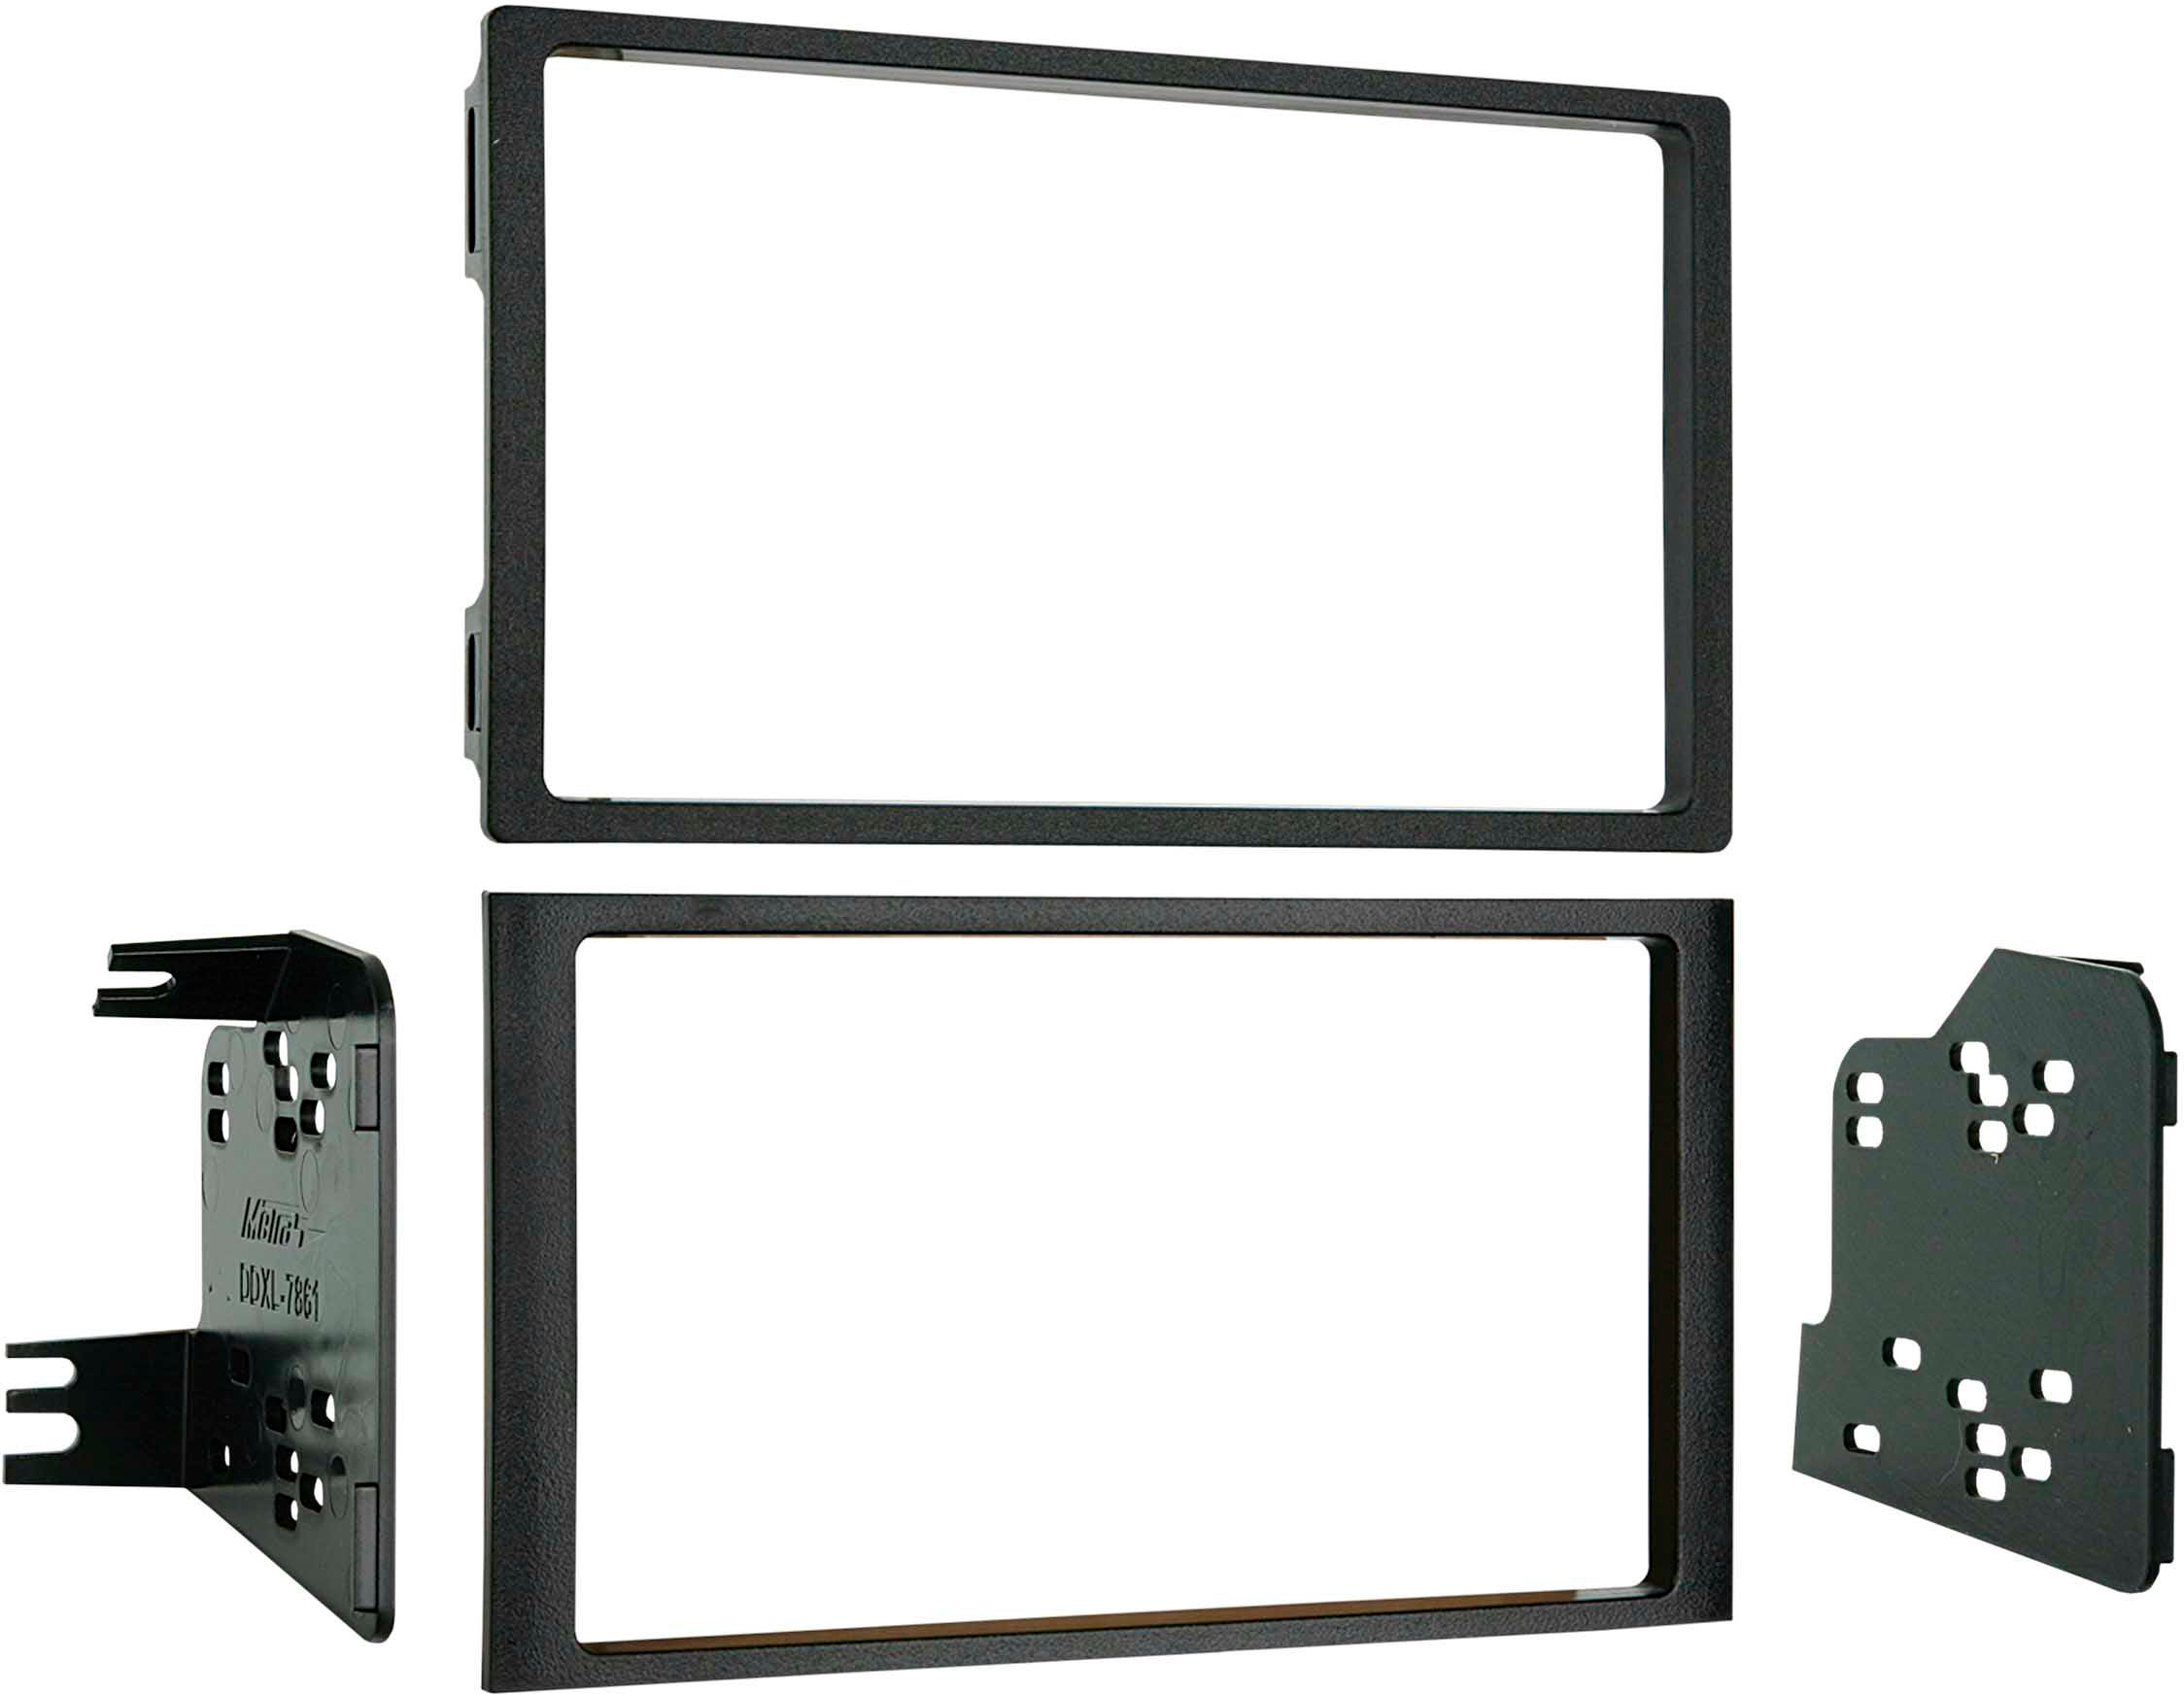 Angle View: Metra - Dash Kit for Select 2001-2007 Toyota Sequoia Tundra Double Cab Tundra Standard/Access DIN - Black